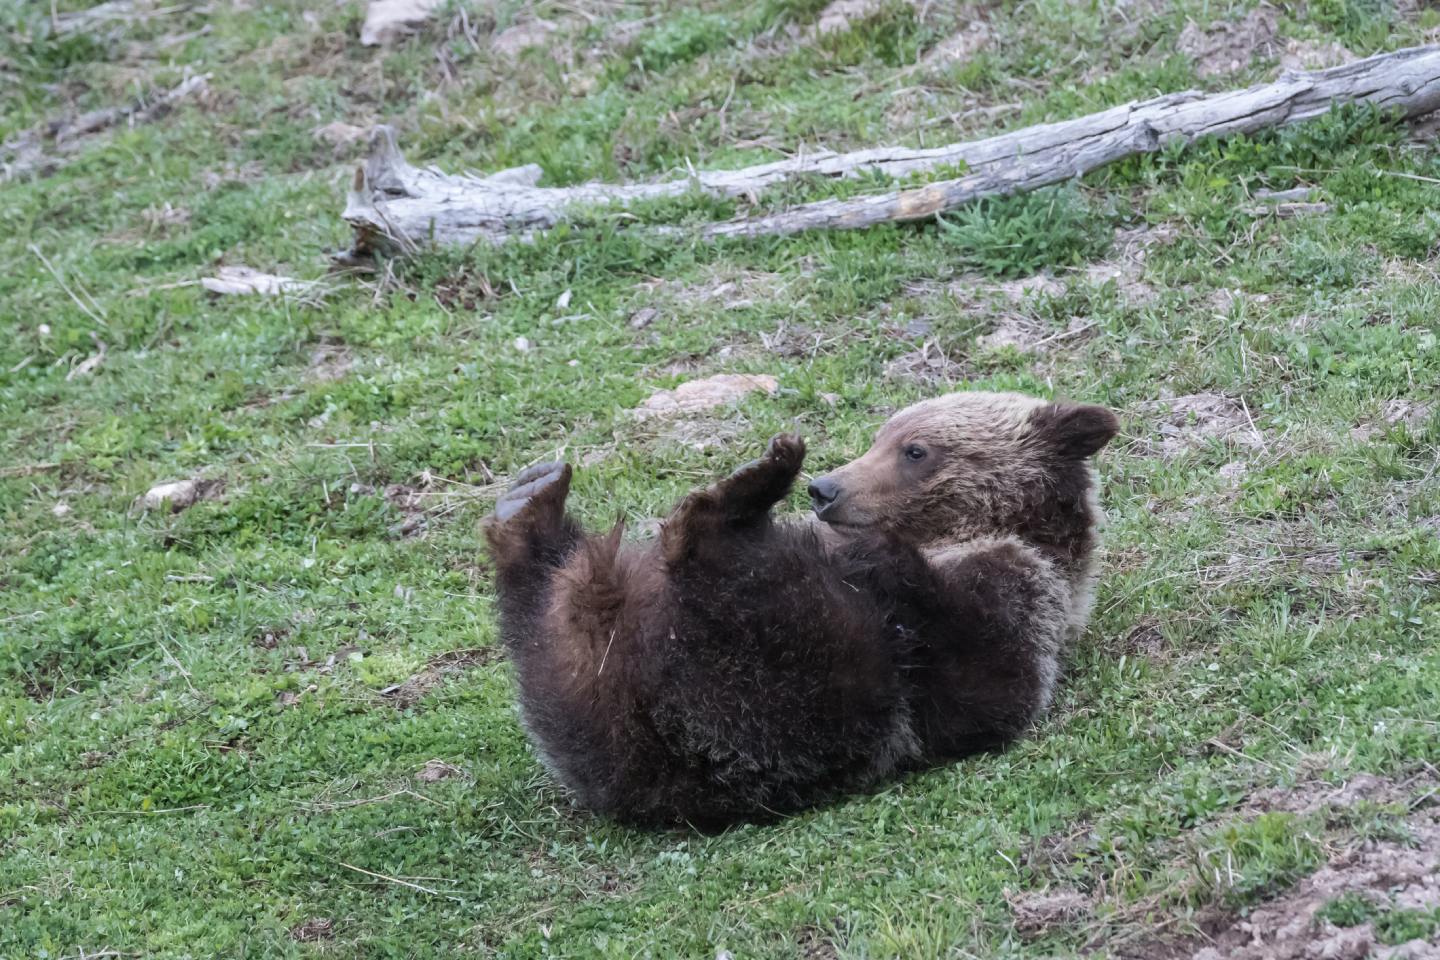 A young grizzly bear rolls in the grass